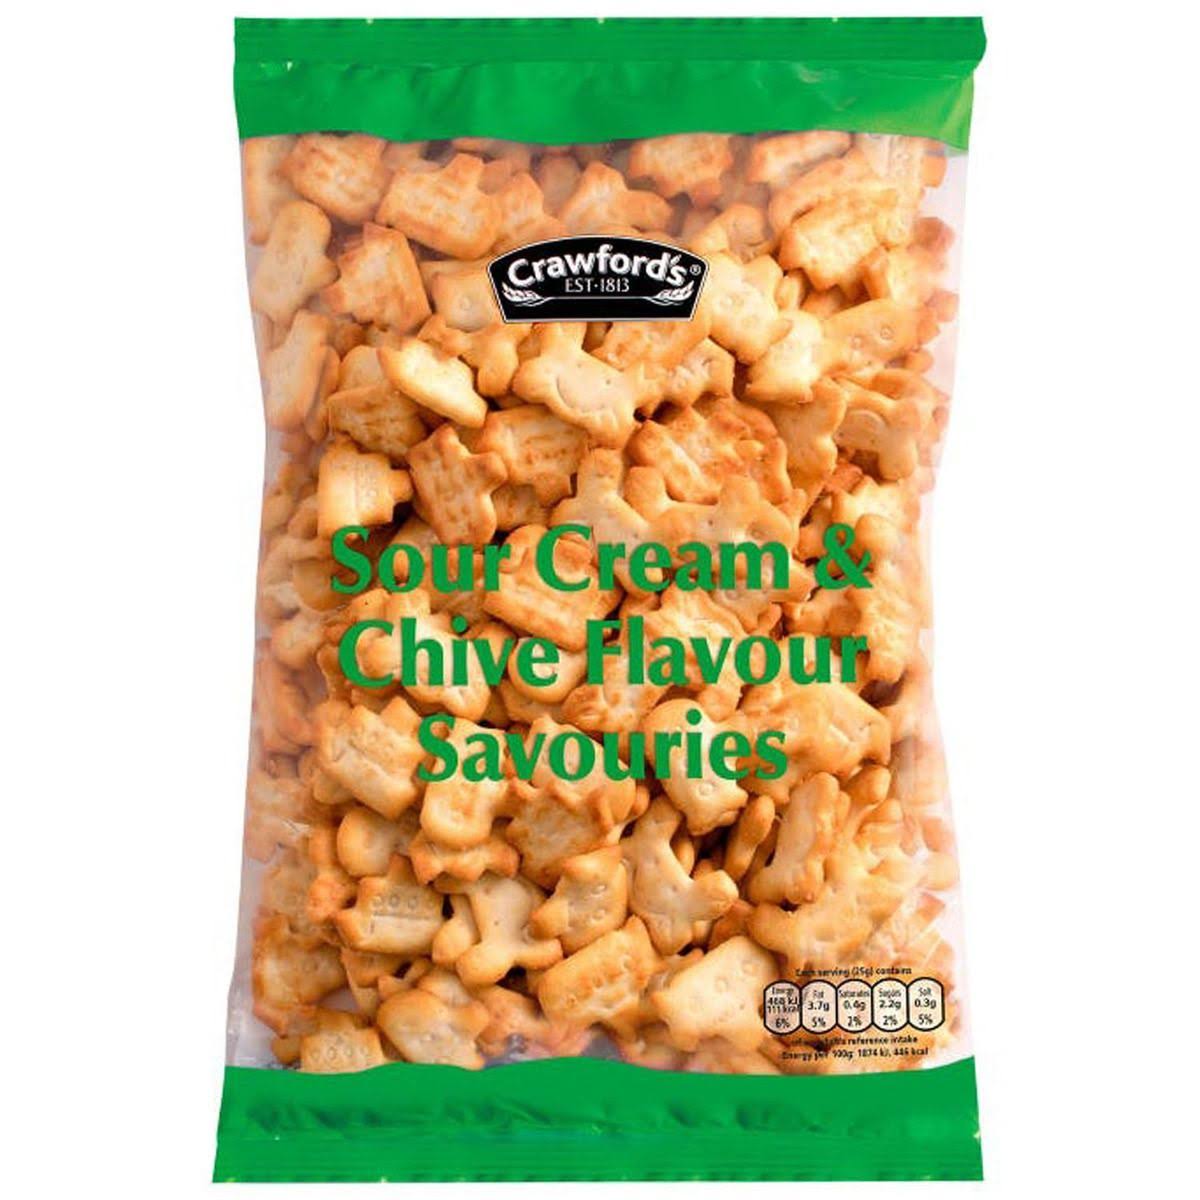 Crawfords Sour Cream and Chive Savouries (250g)